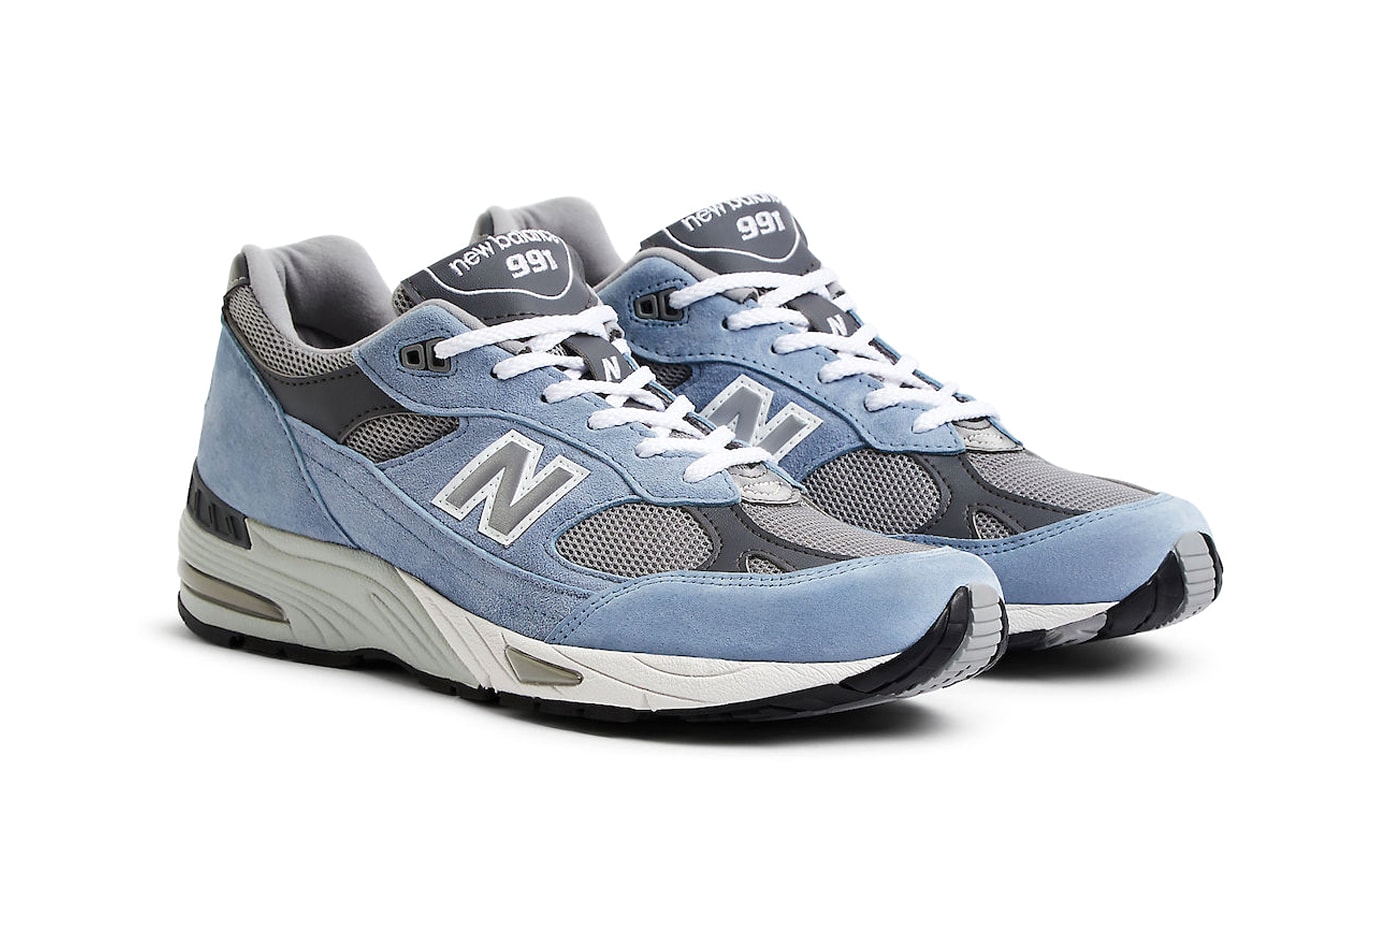 New Balance 991 made in uk slate blue white gray abzorb 220 usd release info date price